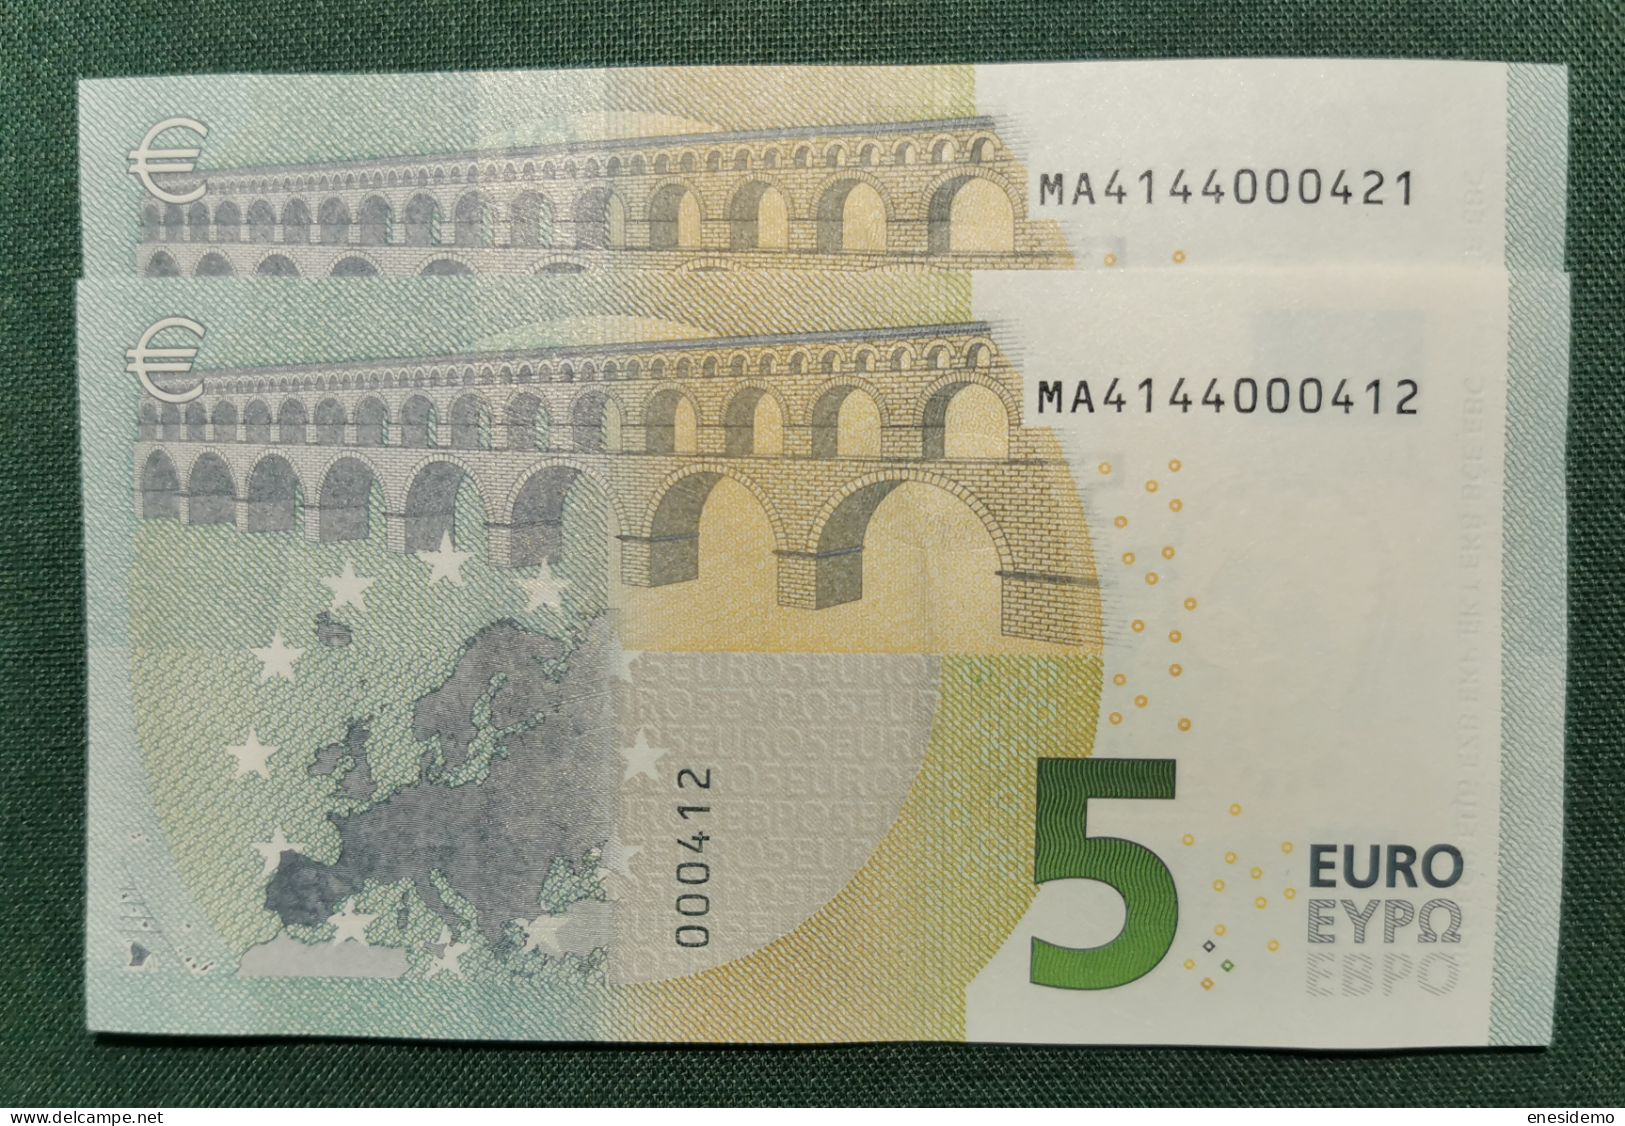 5 EURO PORTUGAL 2013 DRAGHI M006I2 MA CORRELATIVE COUPLE RADAR 2 ONLY FOUR NUMBERS SC FDS UNCIRCULATED PERFECT - 5 Euro